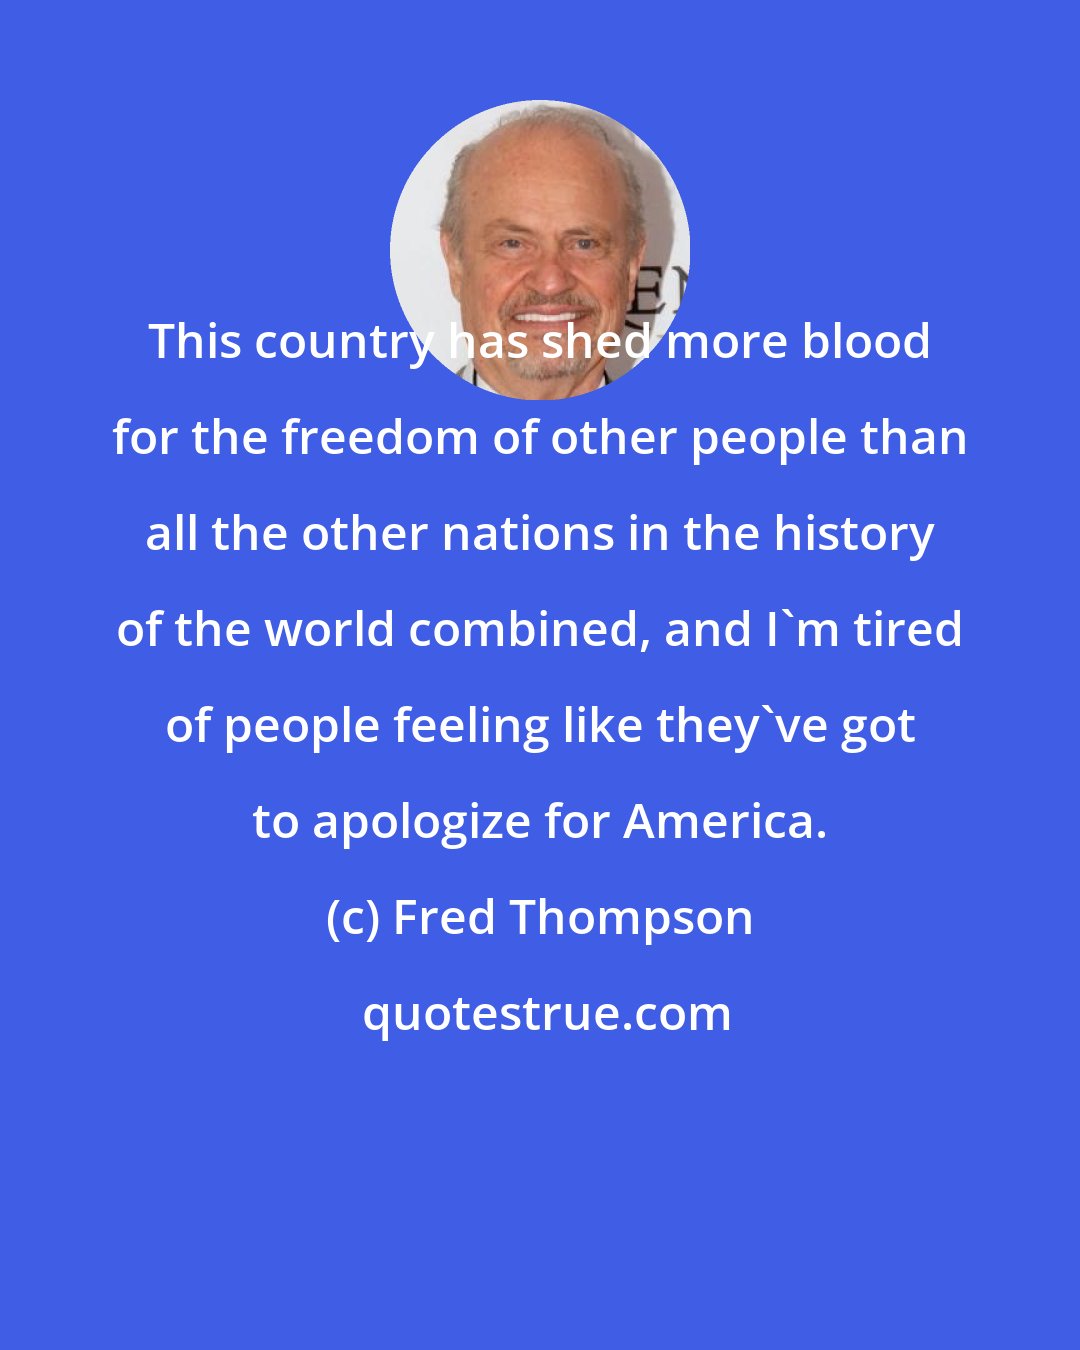 Fred Thompson: This country has shed more blood for the freedom of other people than all the other nations in the history of the world combined, and I'm tired of people feeling like they've got to apologize for America.